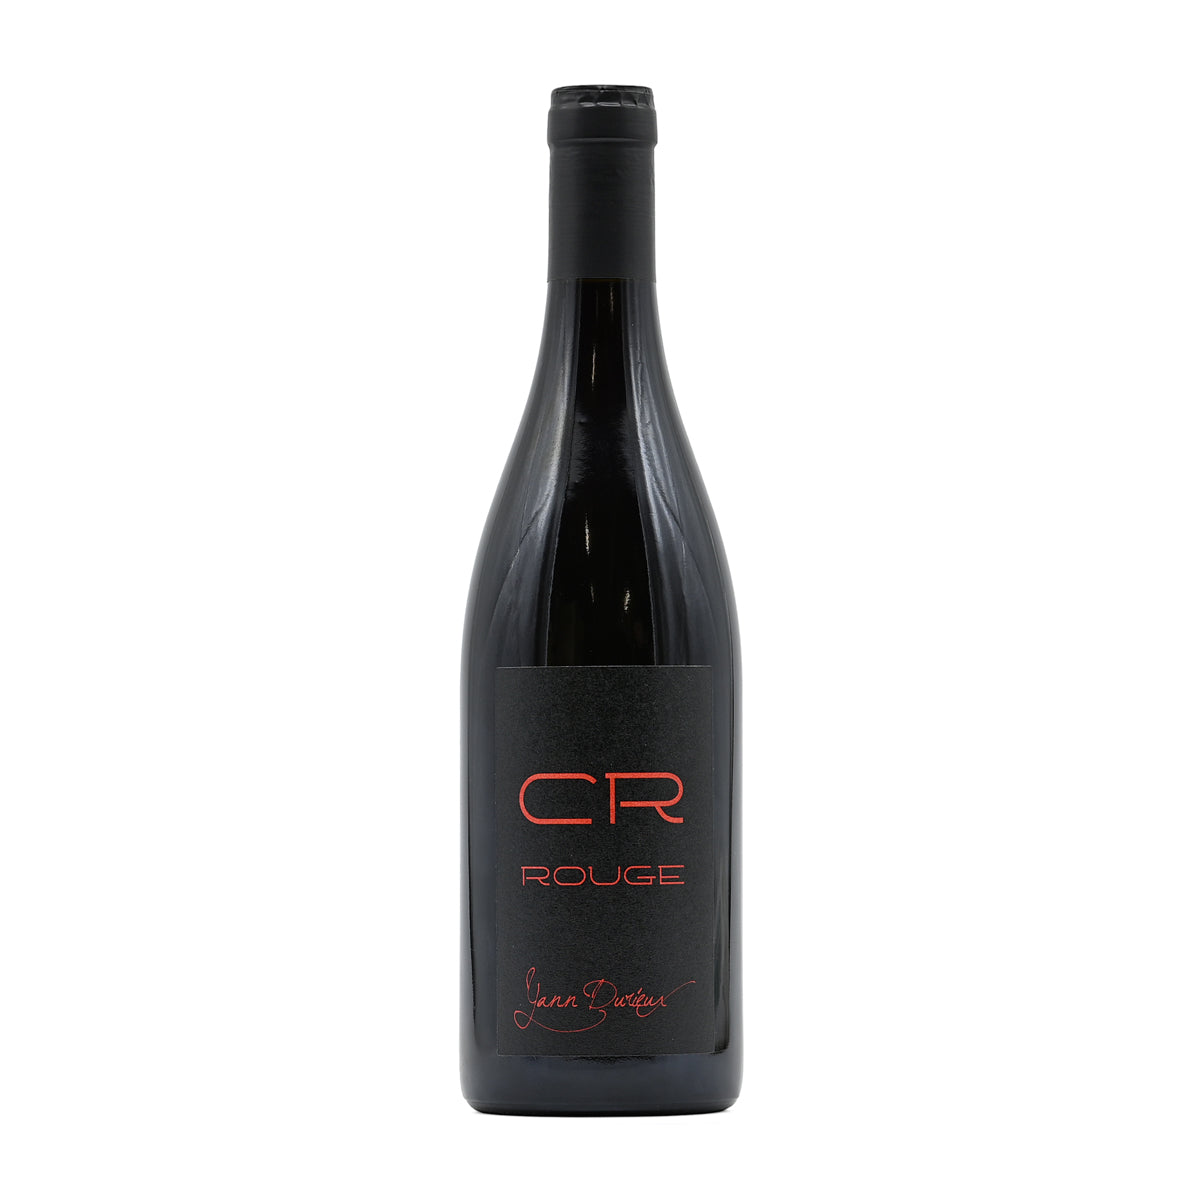 Yann Durieux CR Rouge 2019, 750ml French red wine, made from Pinot Noir; Vin de France, from Burgundy, France – GDV Fine Wines, Hong Kong